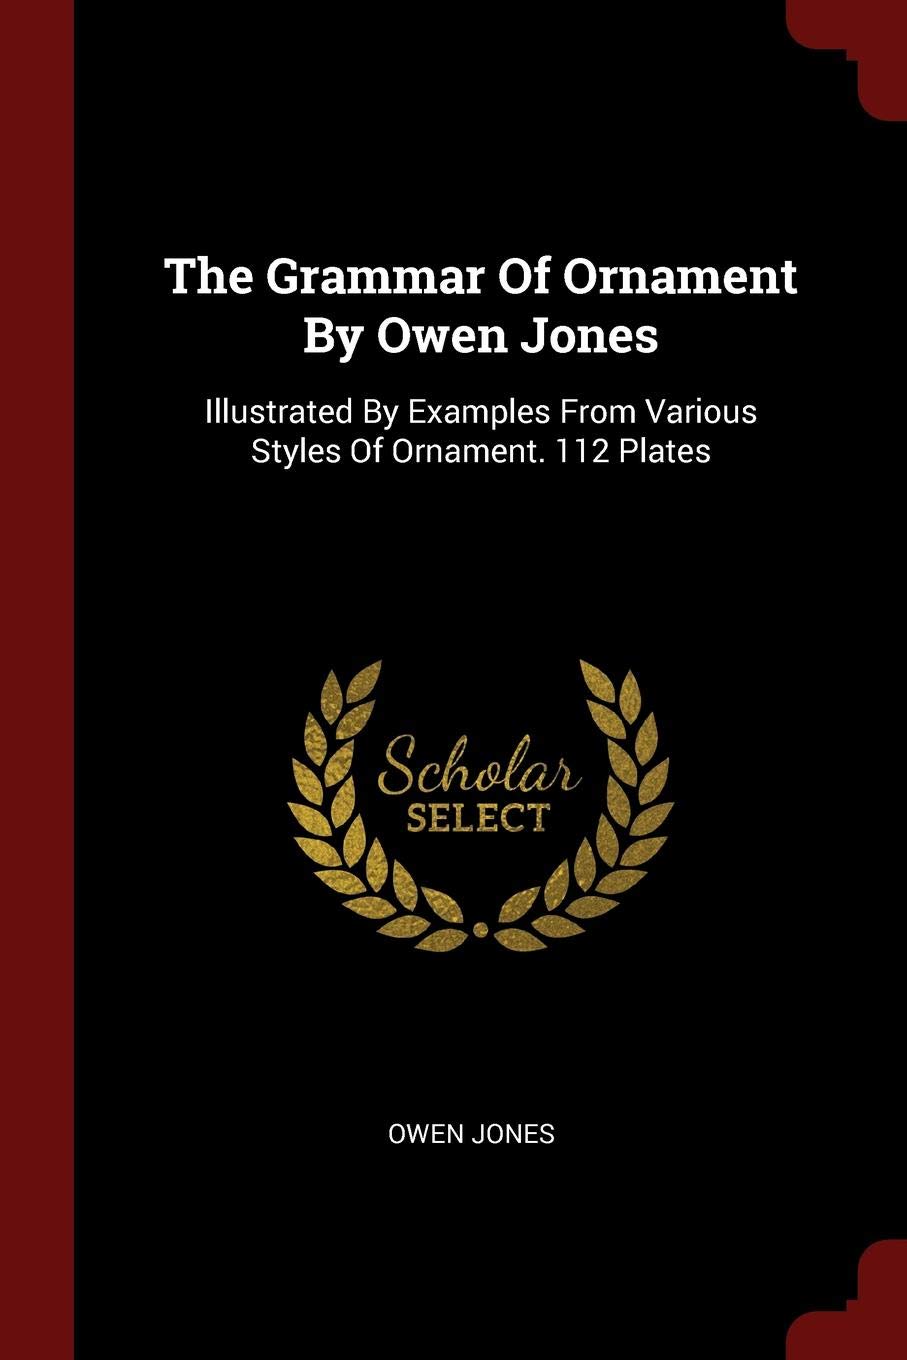 THE GRAMMAR OF ORNAMENT BY OWEN JONES: ILLUSTRATED BY EXAMPLES FROM VARIOUS STYLES OF ORNAMENT. 112